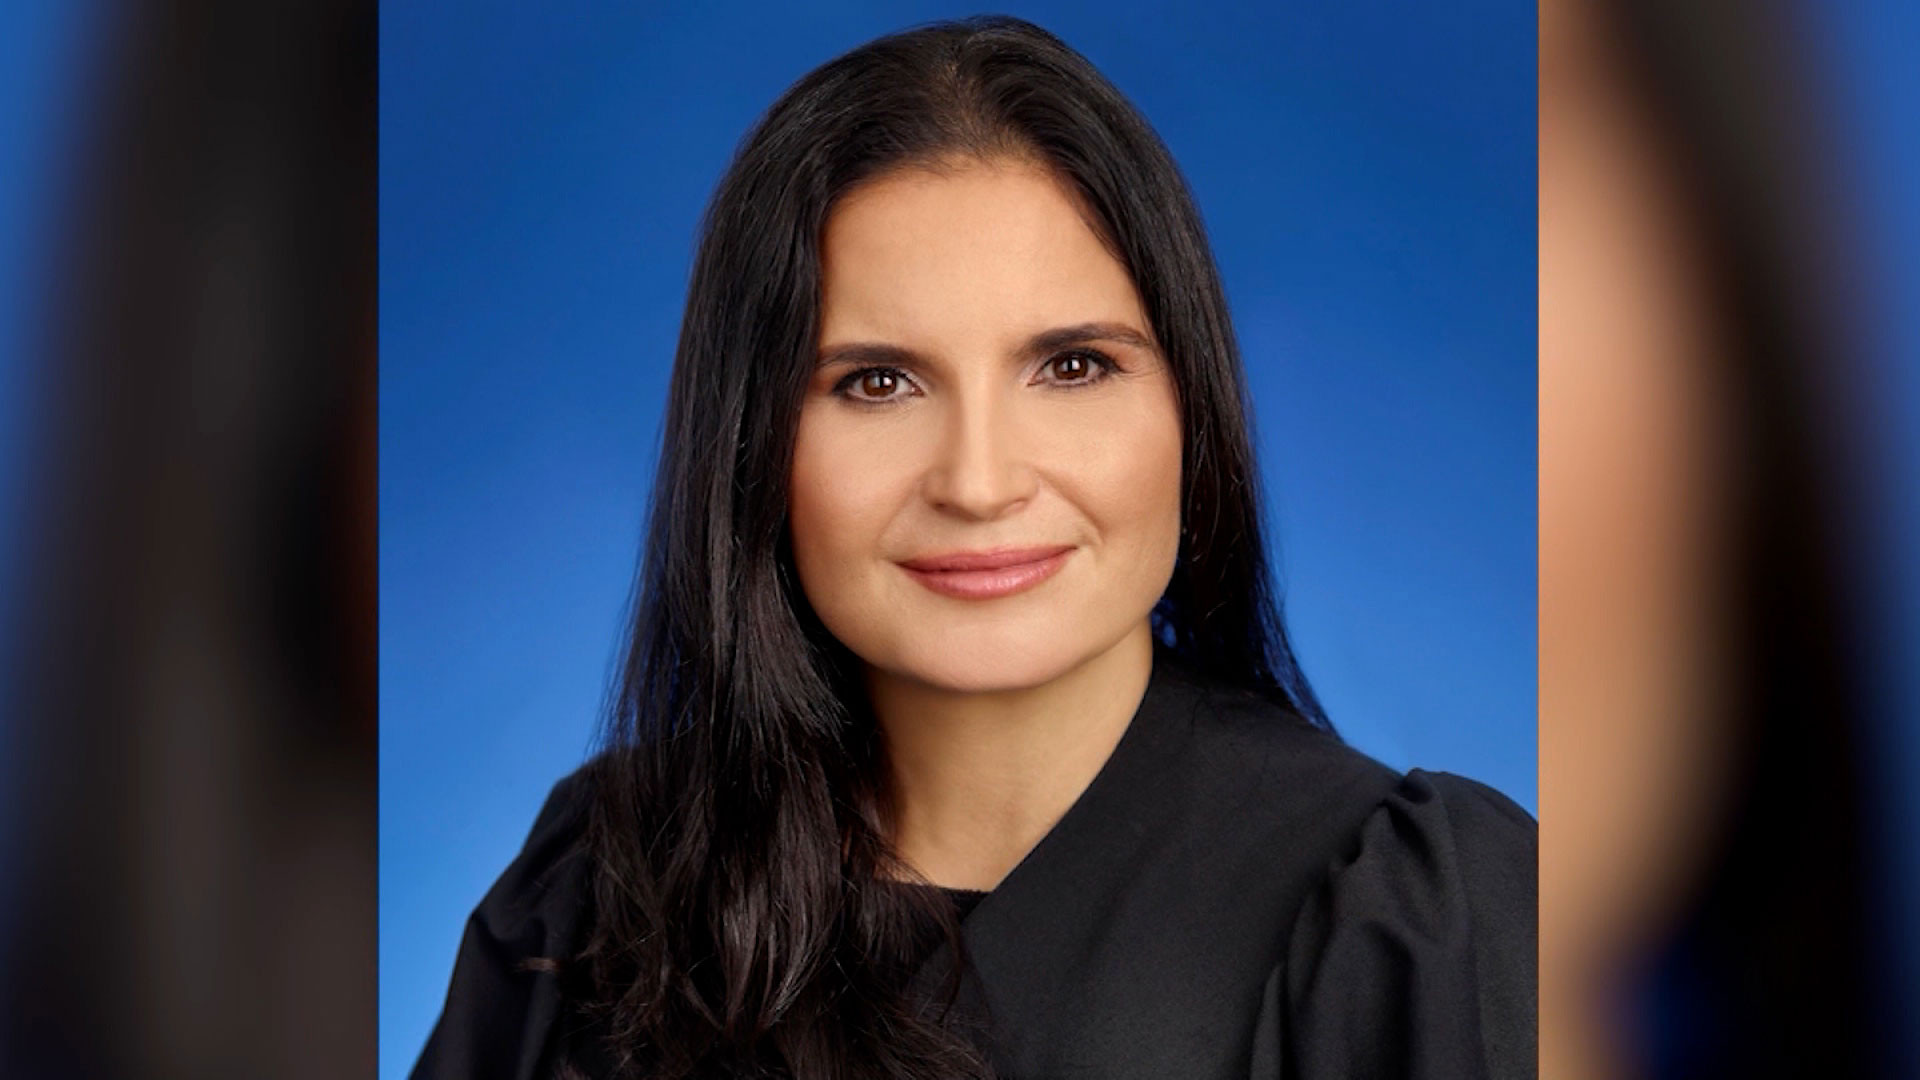 Federal District Judge Aileen Cannon